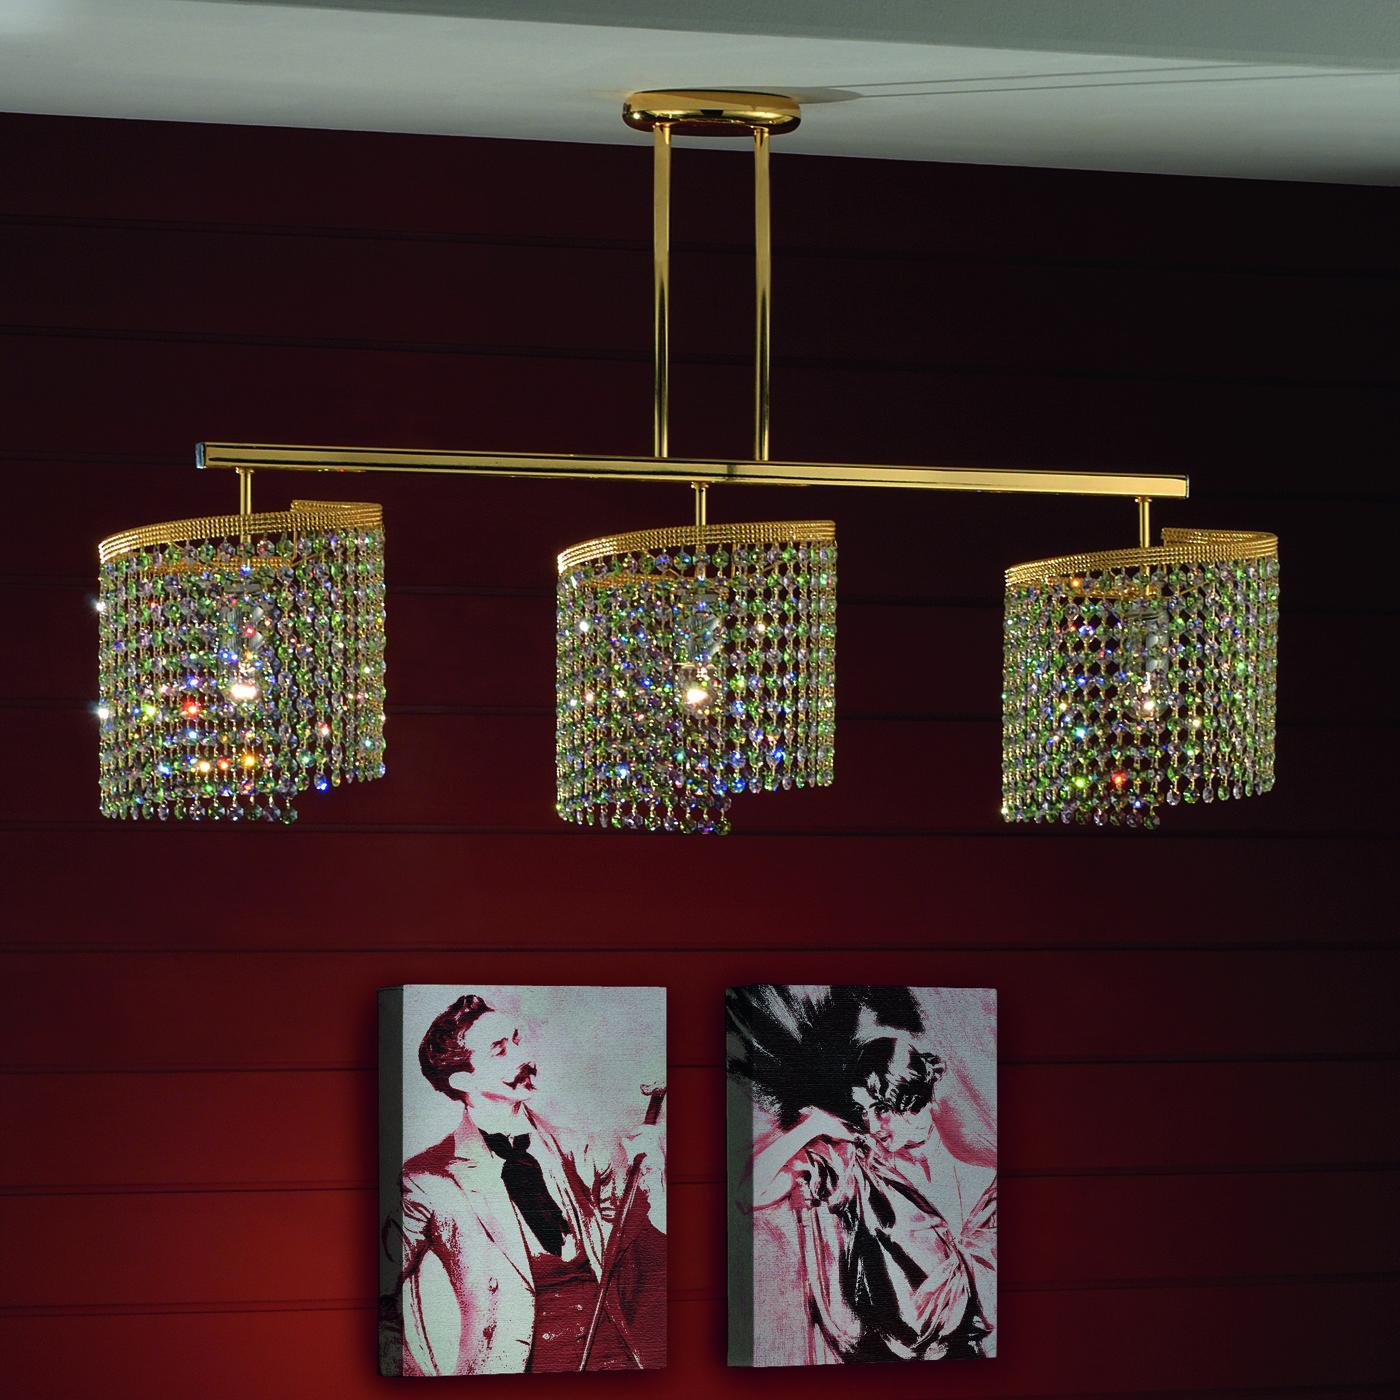 Natural and artificial reflections catch the eye of those who enter a room illuminated by this piece. This three lights chandelier, made of glass with precious sparkling gold inserts, certainly steals the show. A gold-colored rectangular base